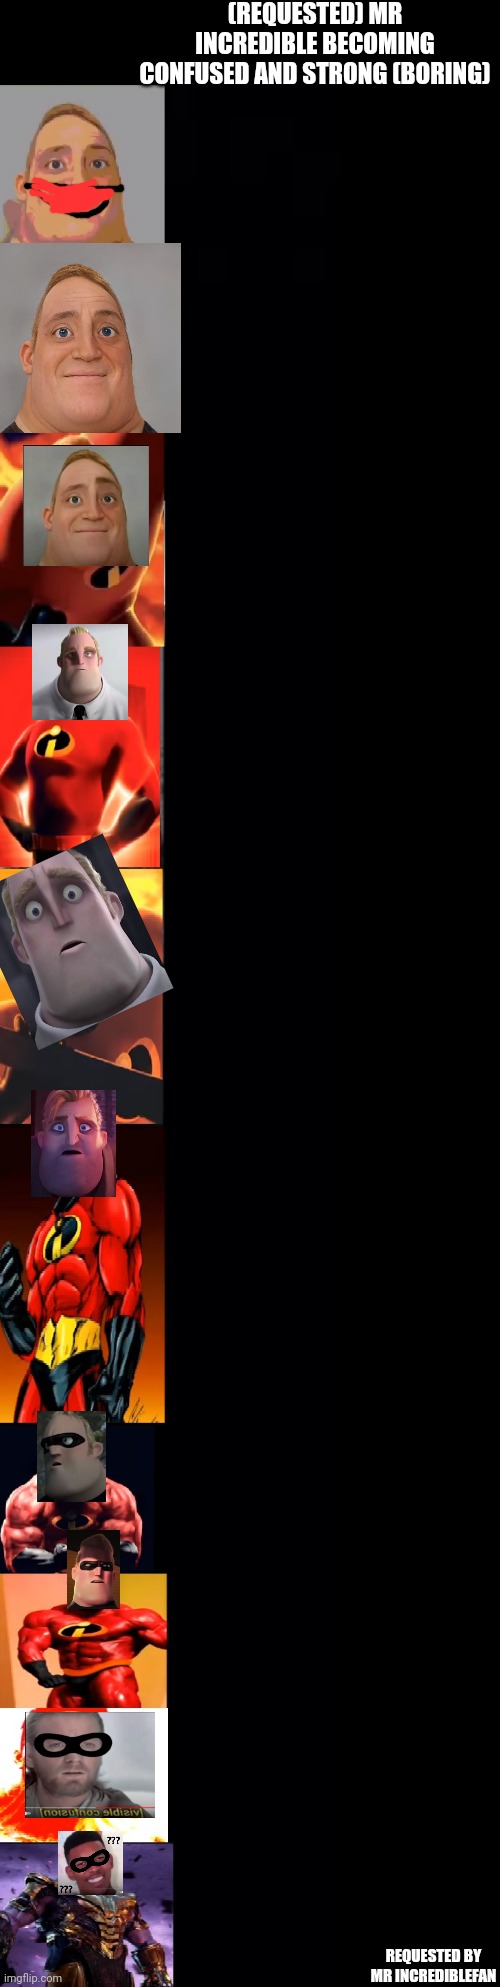 (Credit Mr IncredibleFan) | (REQUESTED) MR INCREDIBLE BECOMING CONFUSED AND STRONG (BORING); REQUESTED BY MR INCREDIBLEFAN | image tagged in nice | made w/ Imgflip meme maker